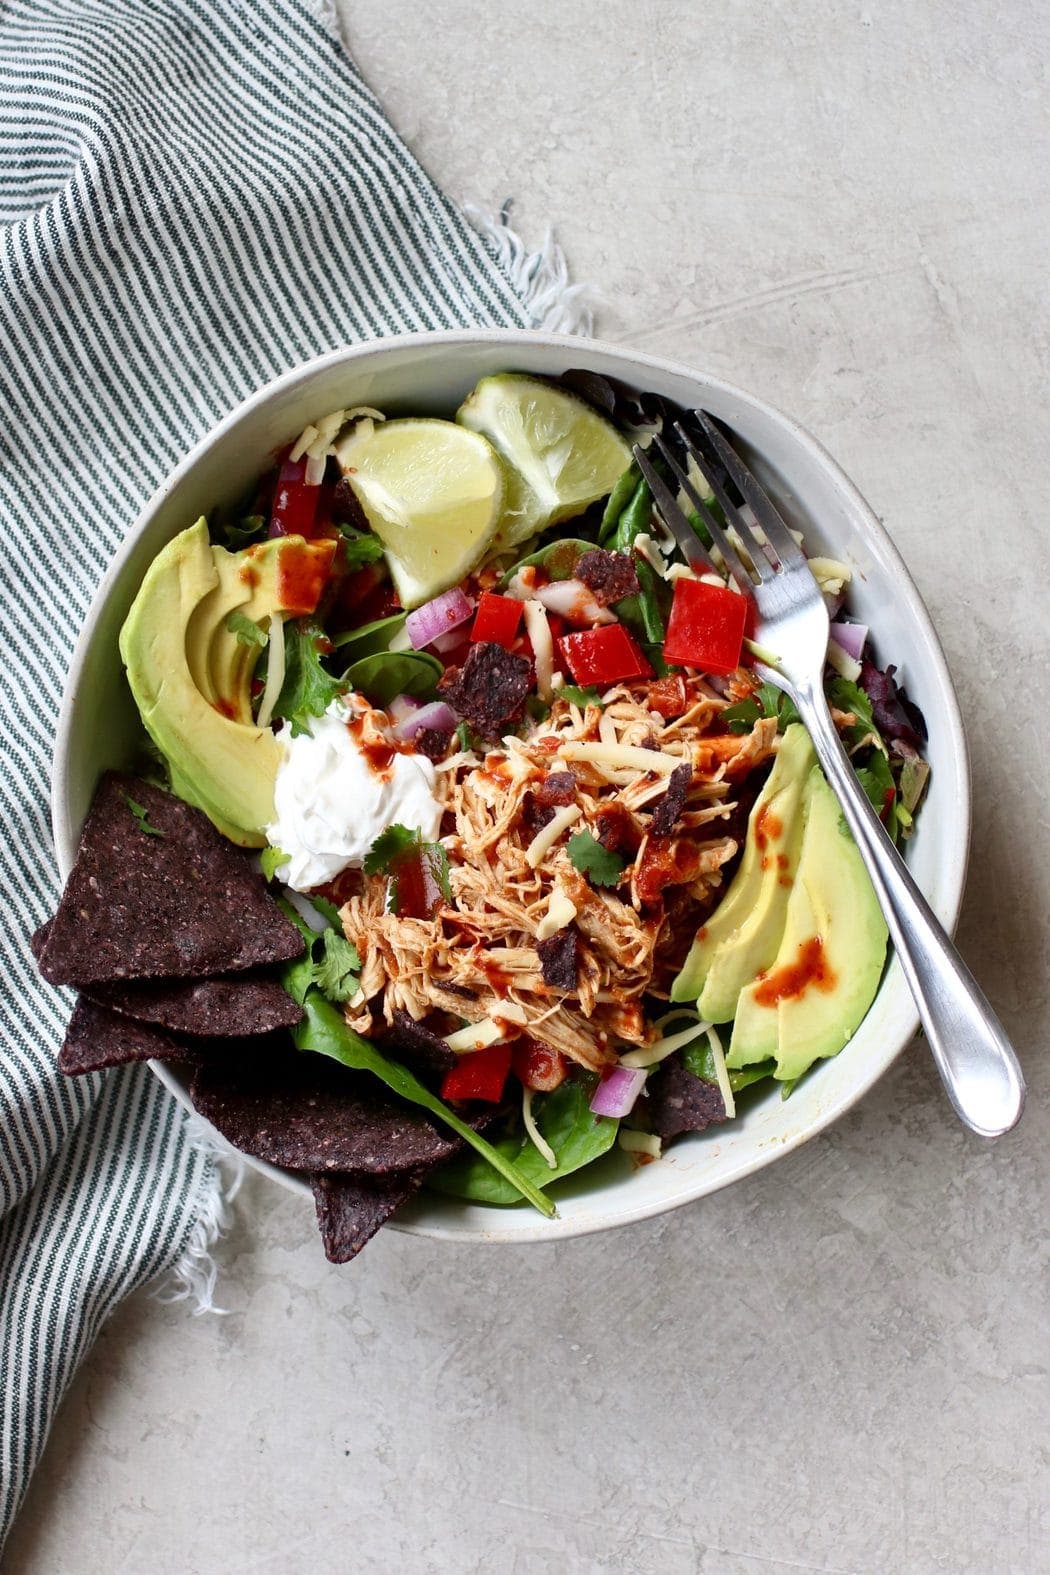 Shredded chicken over a mixed green salad and topped with avocado, lime, and blue chips in a white bowl